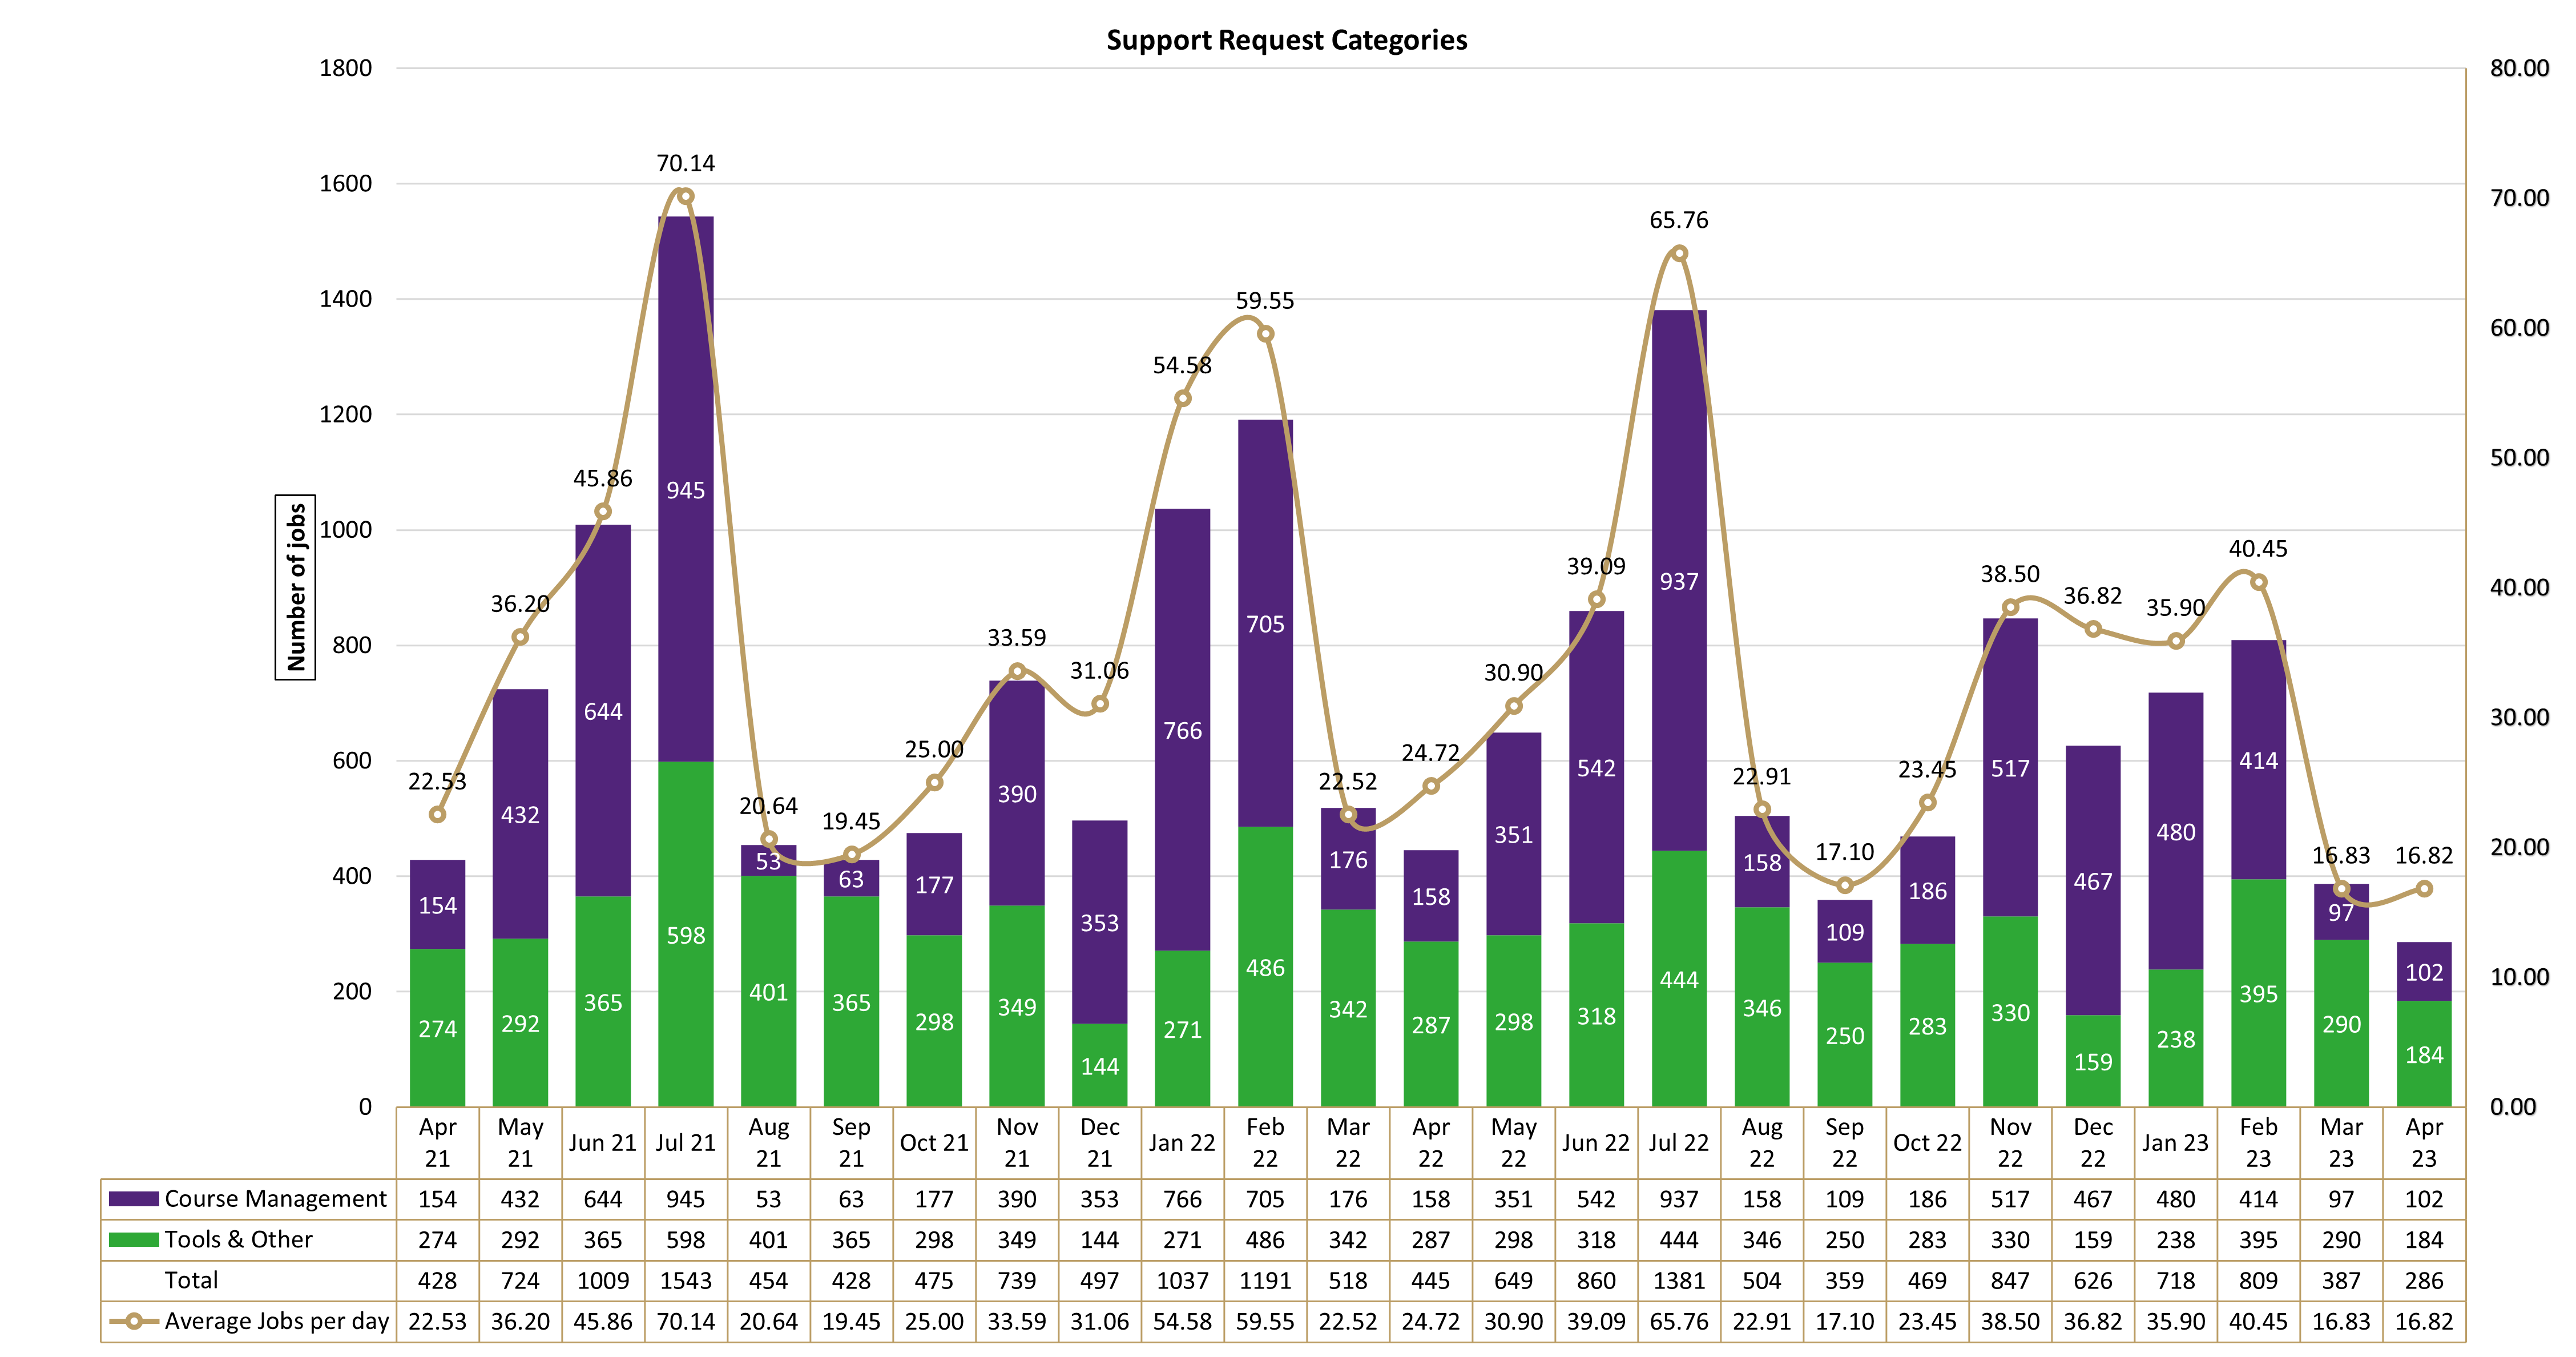 Chart of Support Request Categories from April 2021 to April 2023